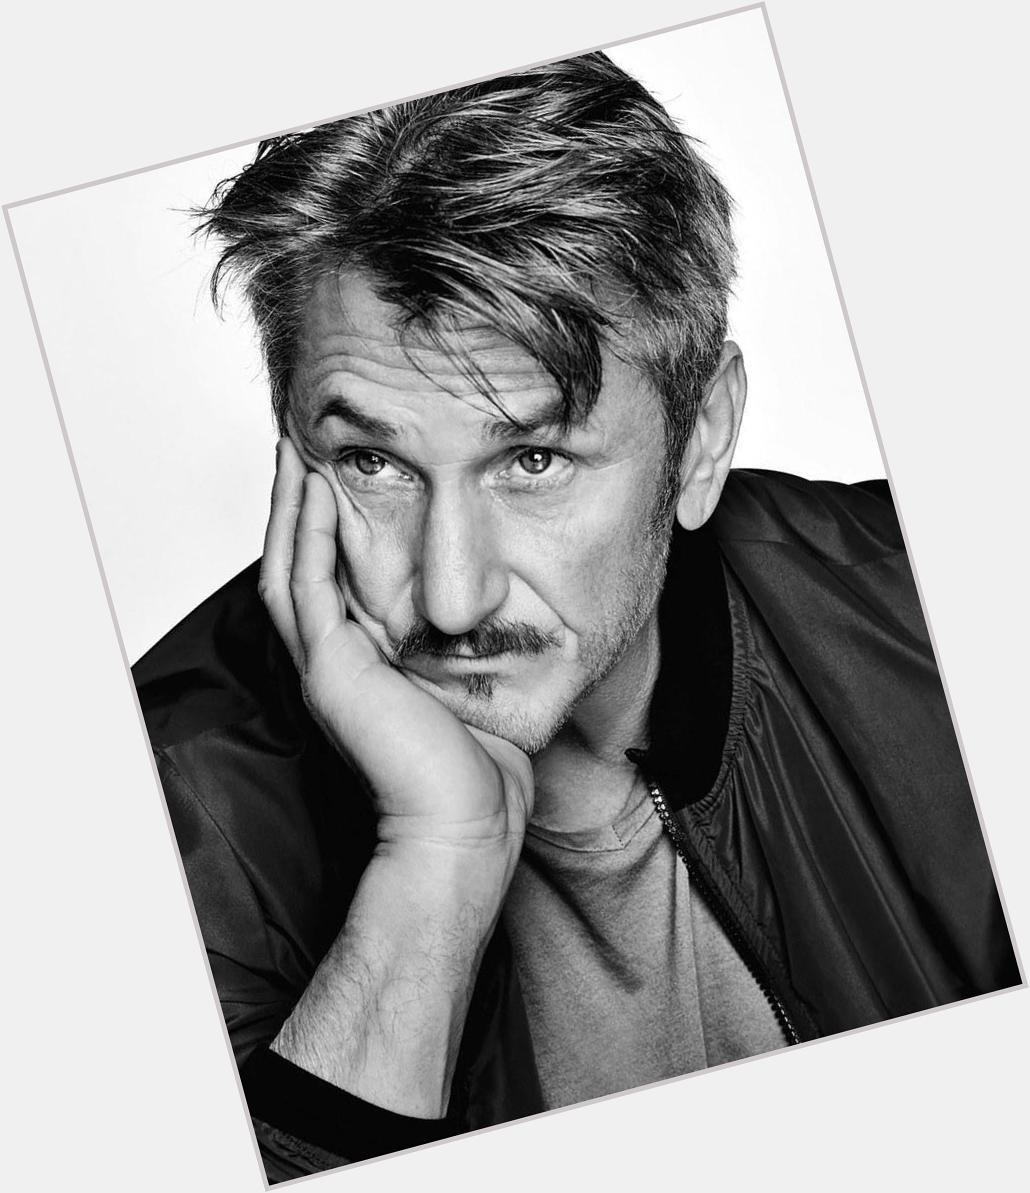 Happy birthday to Sean Penn, the actor/filmmaker turns 59 today!

© Getty Images 